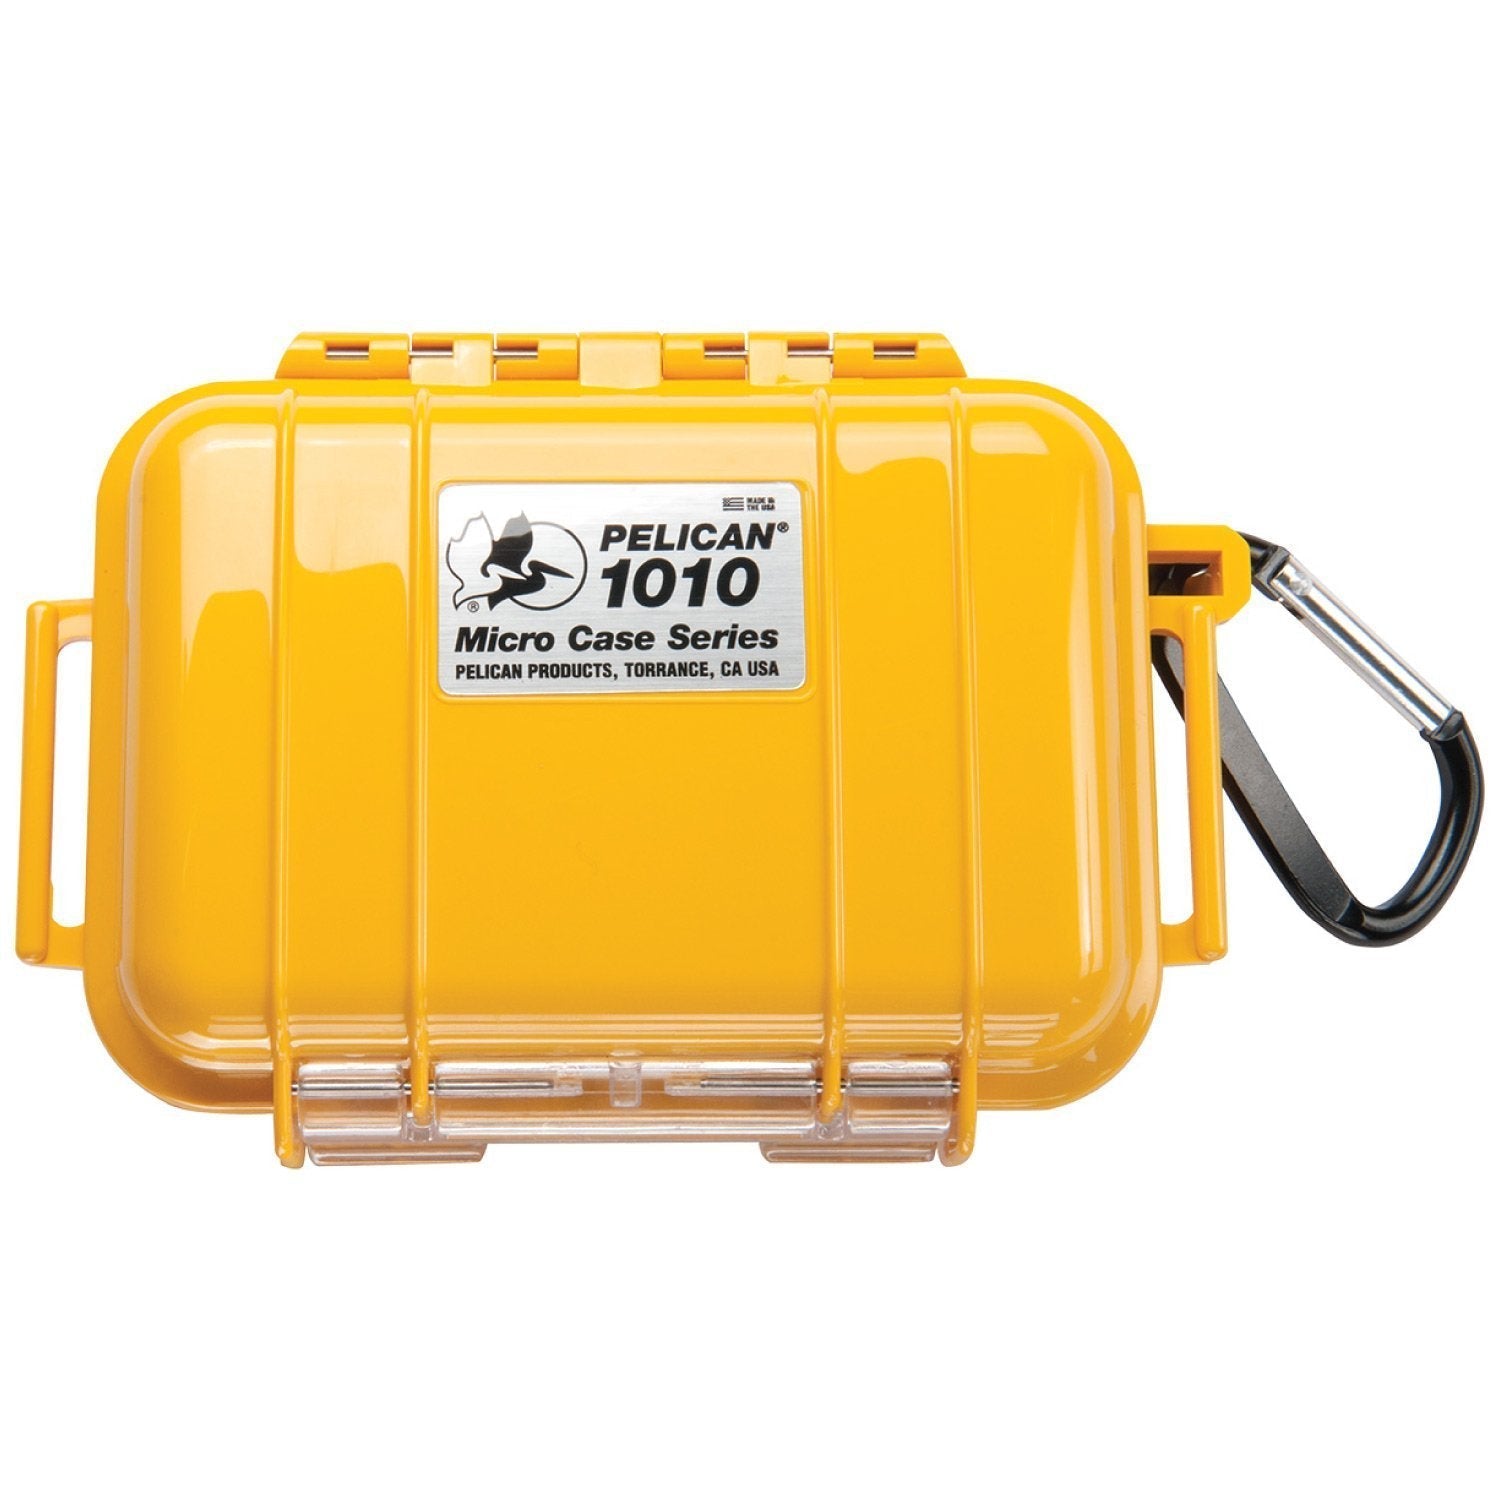 Pelican 1010 Micro Case Cases Pelican Products Yellow Shell with Black Liner Tactical Gear Supplier Tactical Distributors Australia